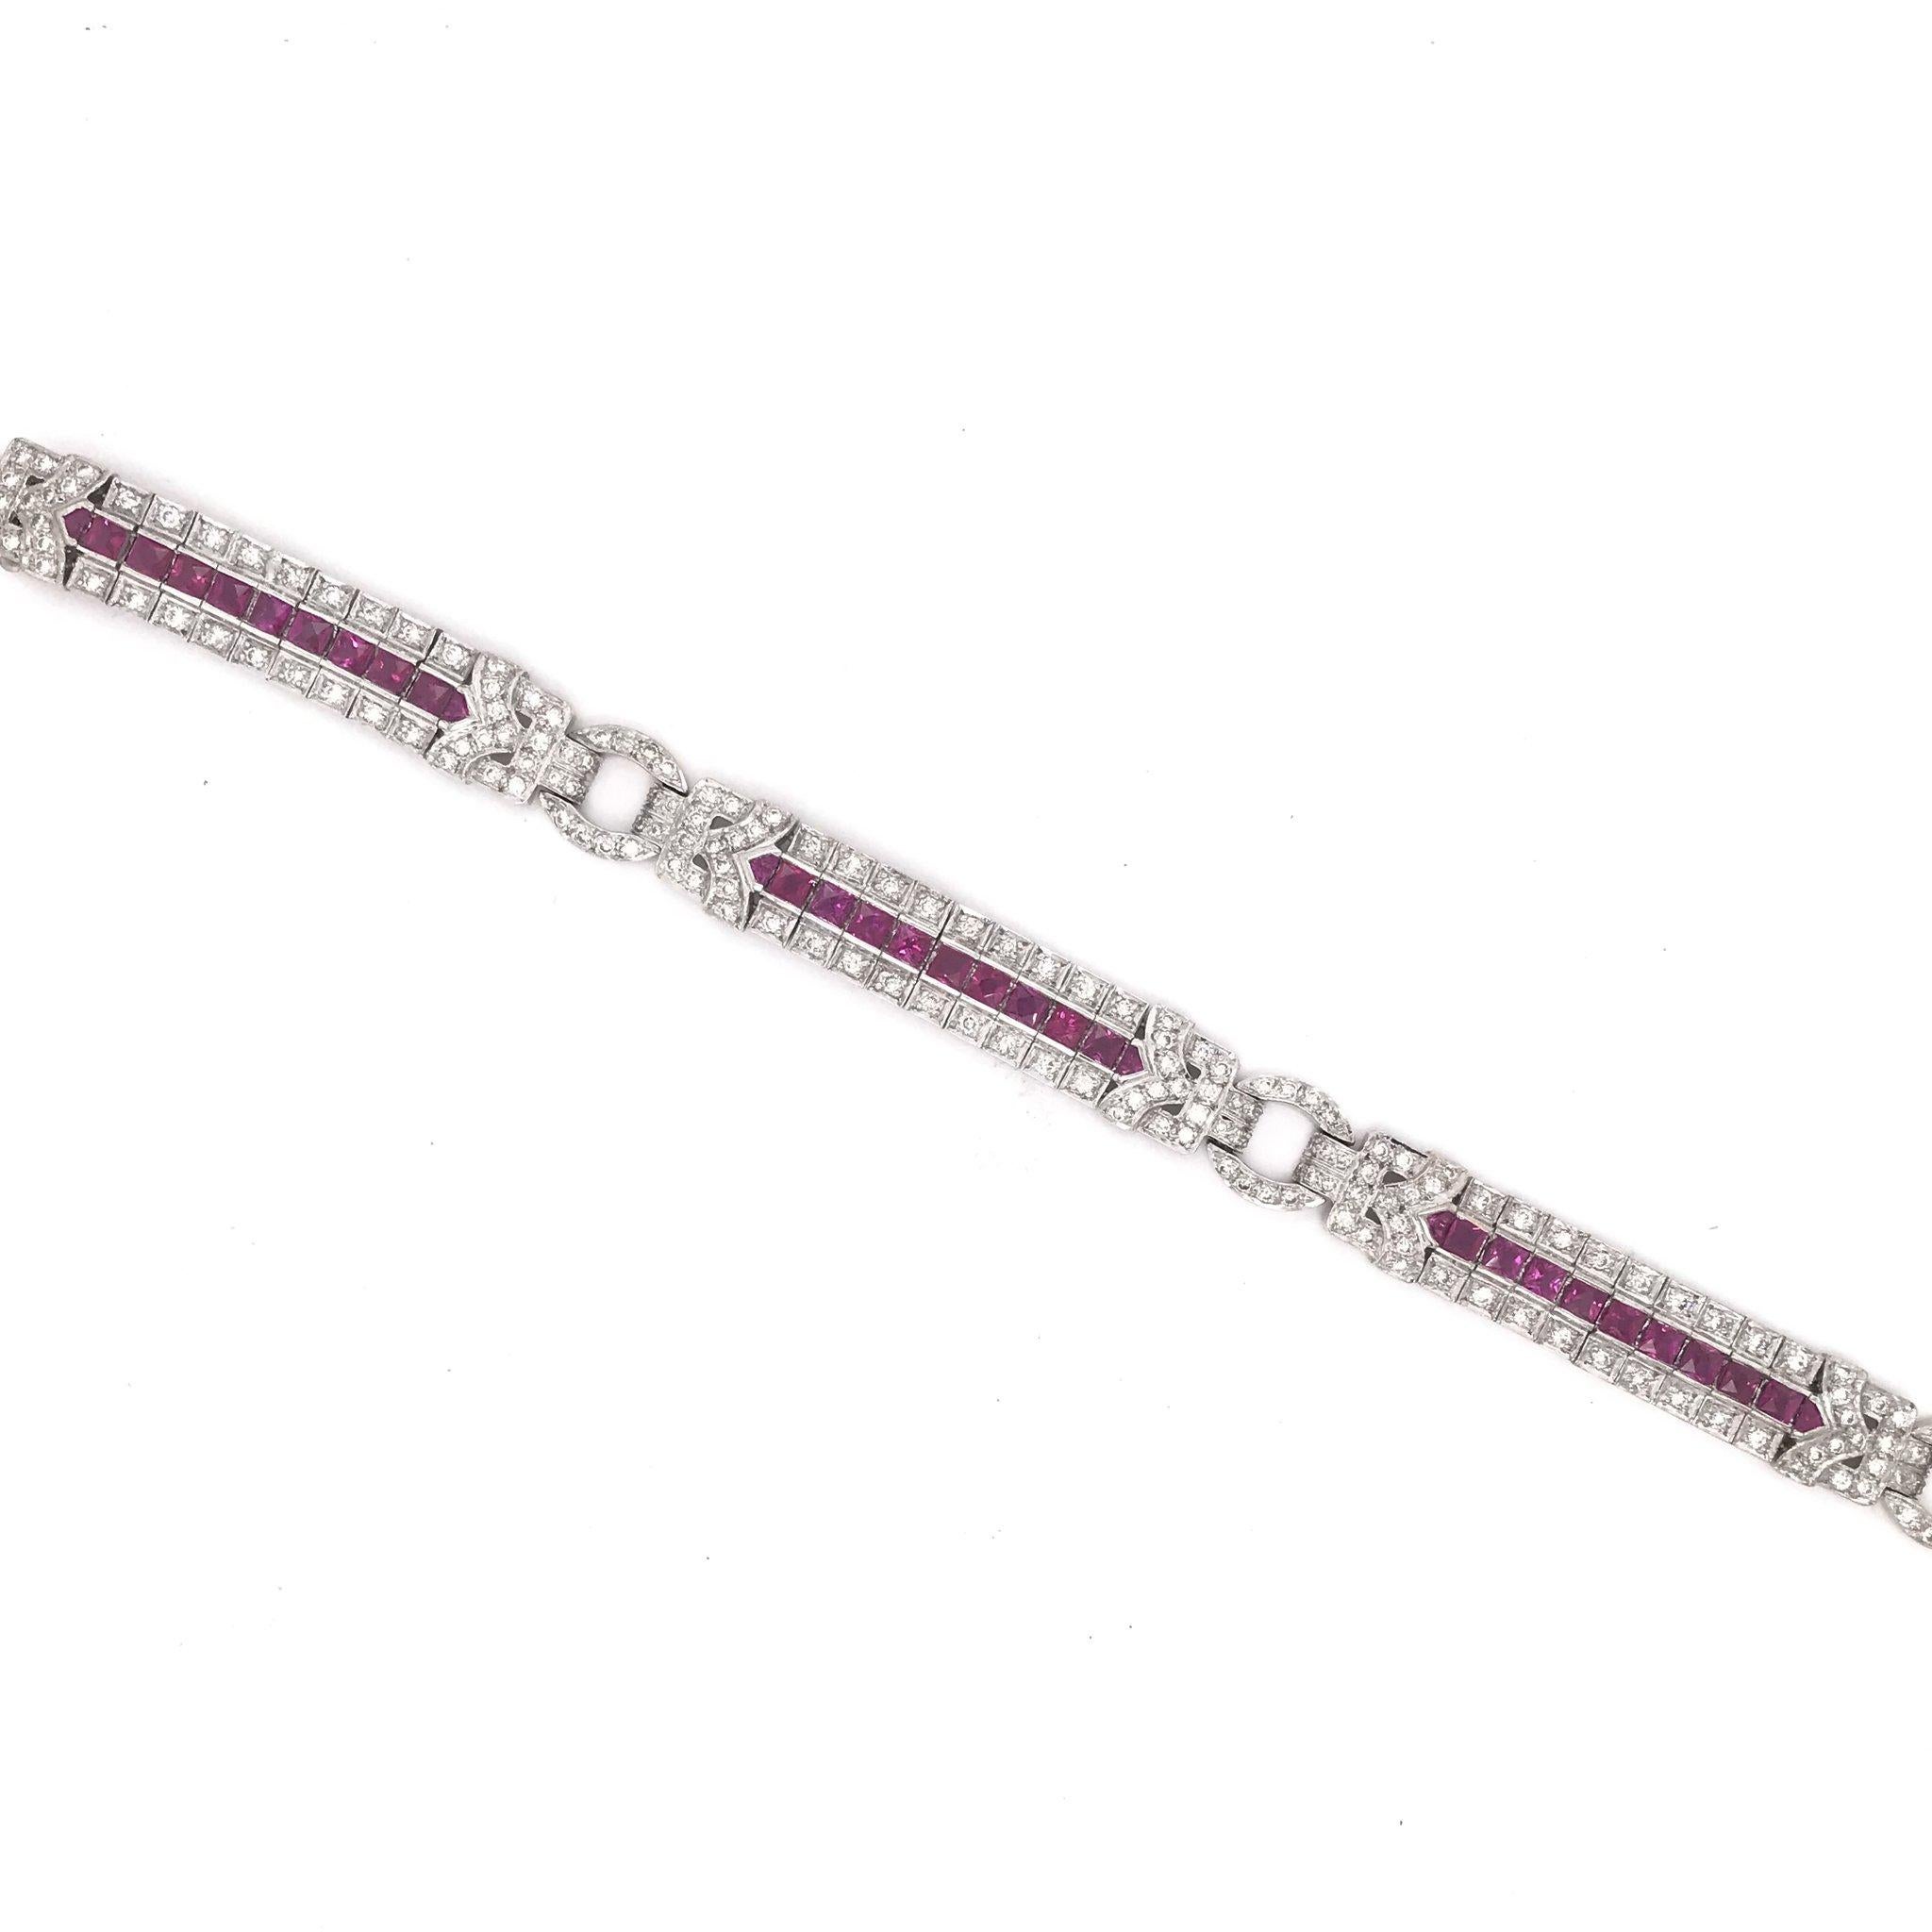 This Art Deco styled bracelet is absolutely unforgettable, featuring 192 diamonds and 33 vibrant rubies. Dripping in the decadence of the roaring twenties this piece has a combined total diamond weight of approximately 2.50 carats and a combined